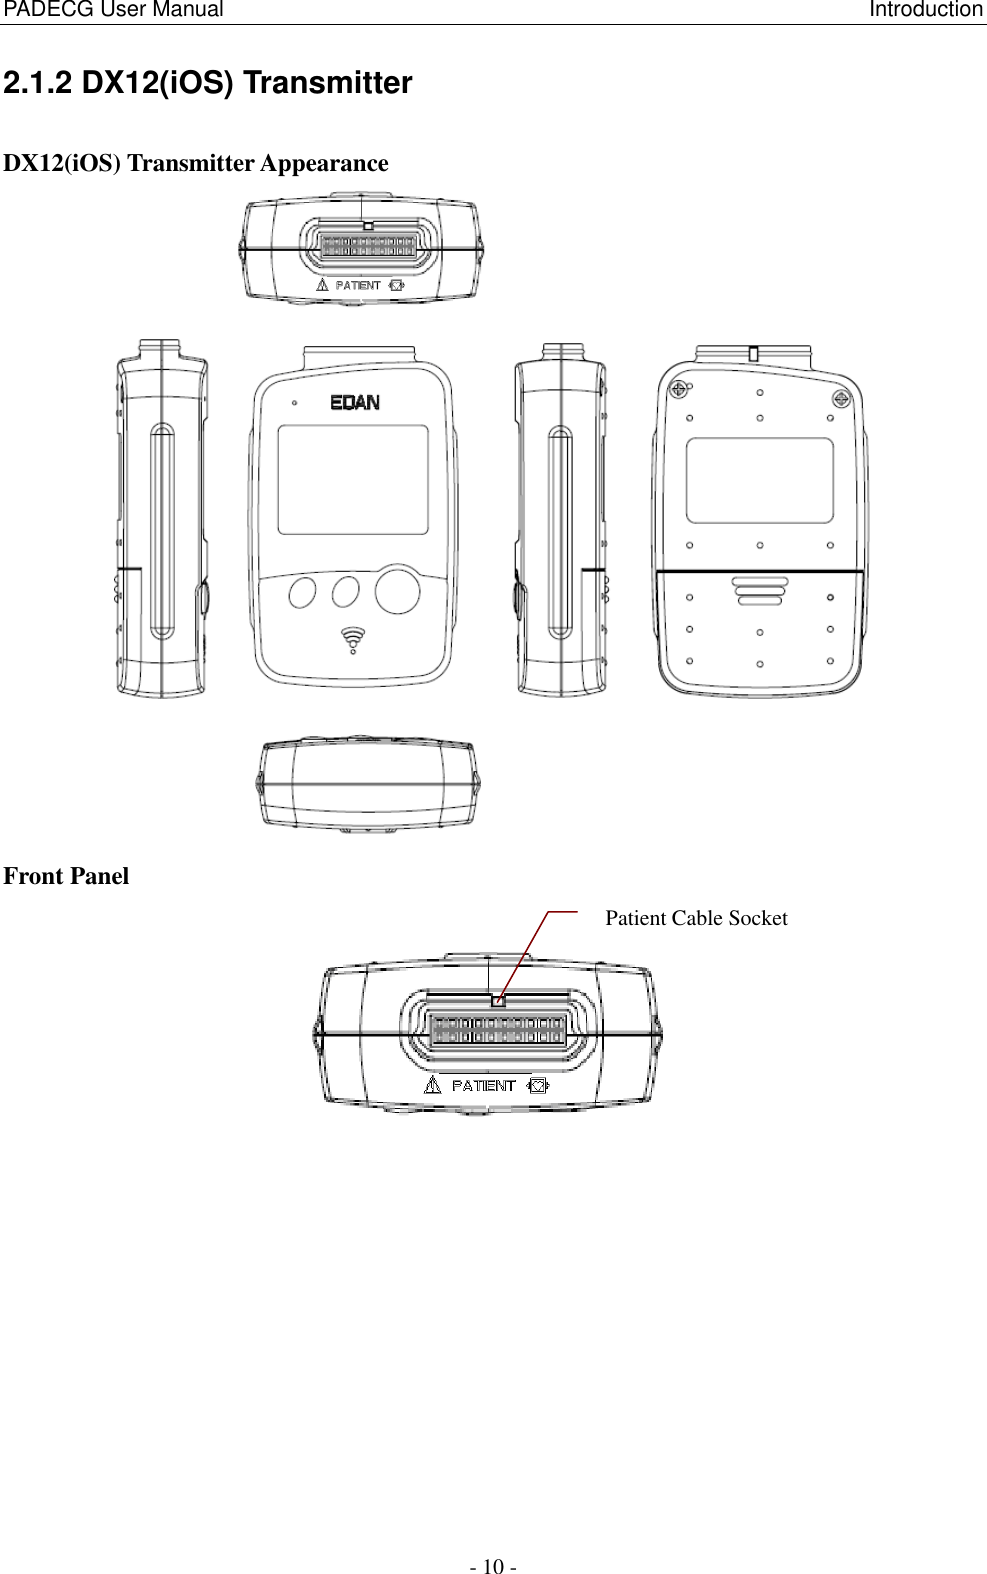 PADECG User Manual                                                                                                                      Introduction - 10 - 2.1.2 DX12(iOS) Transmitter DX12(iOS) Transmitter Appearance                Front Panel  Patient Cable Socket 